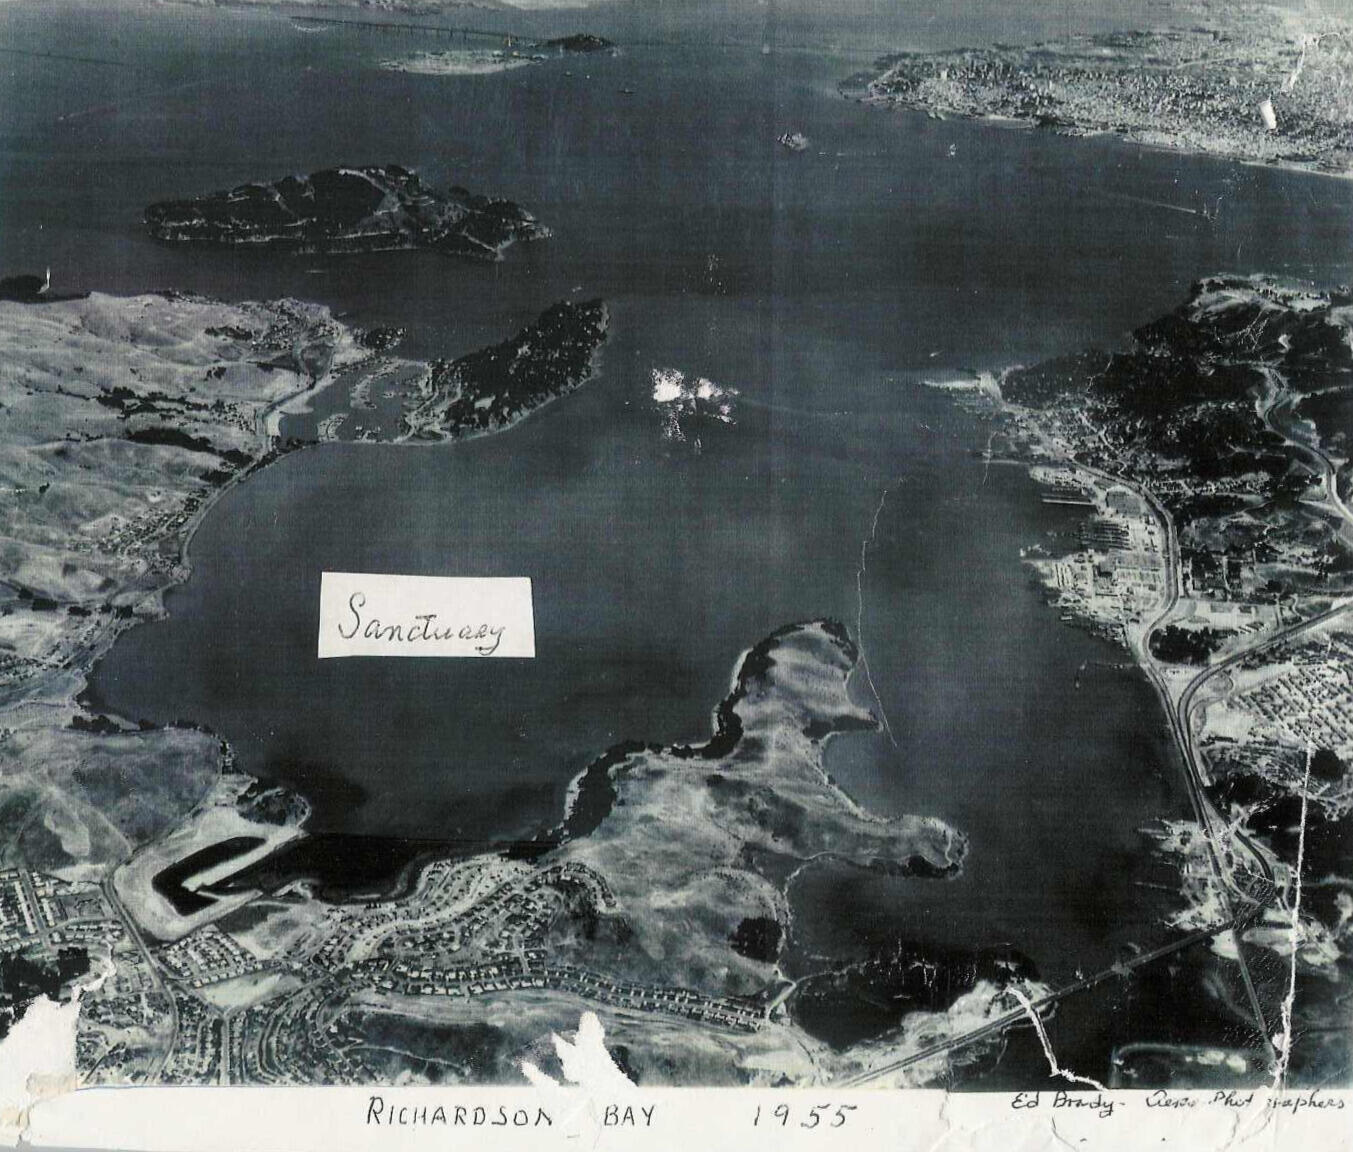 An aerial photo of Richardson Bay in 1955.